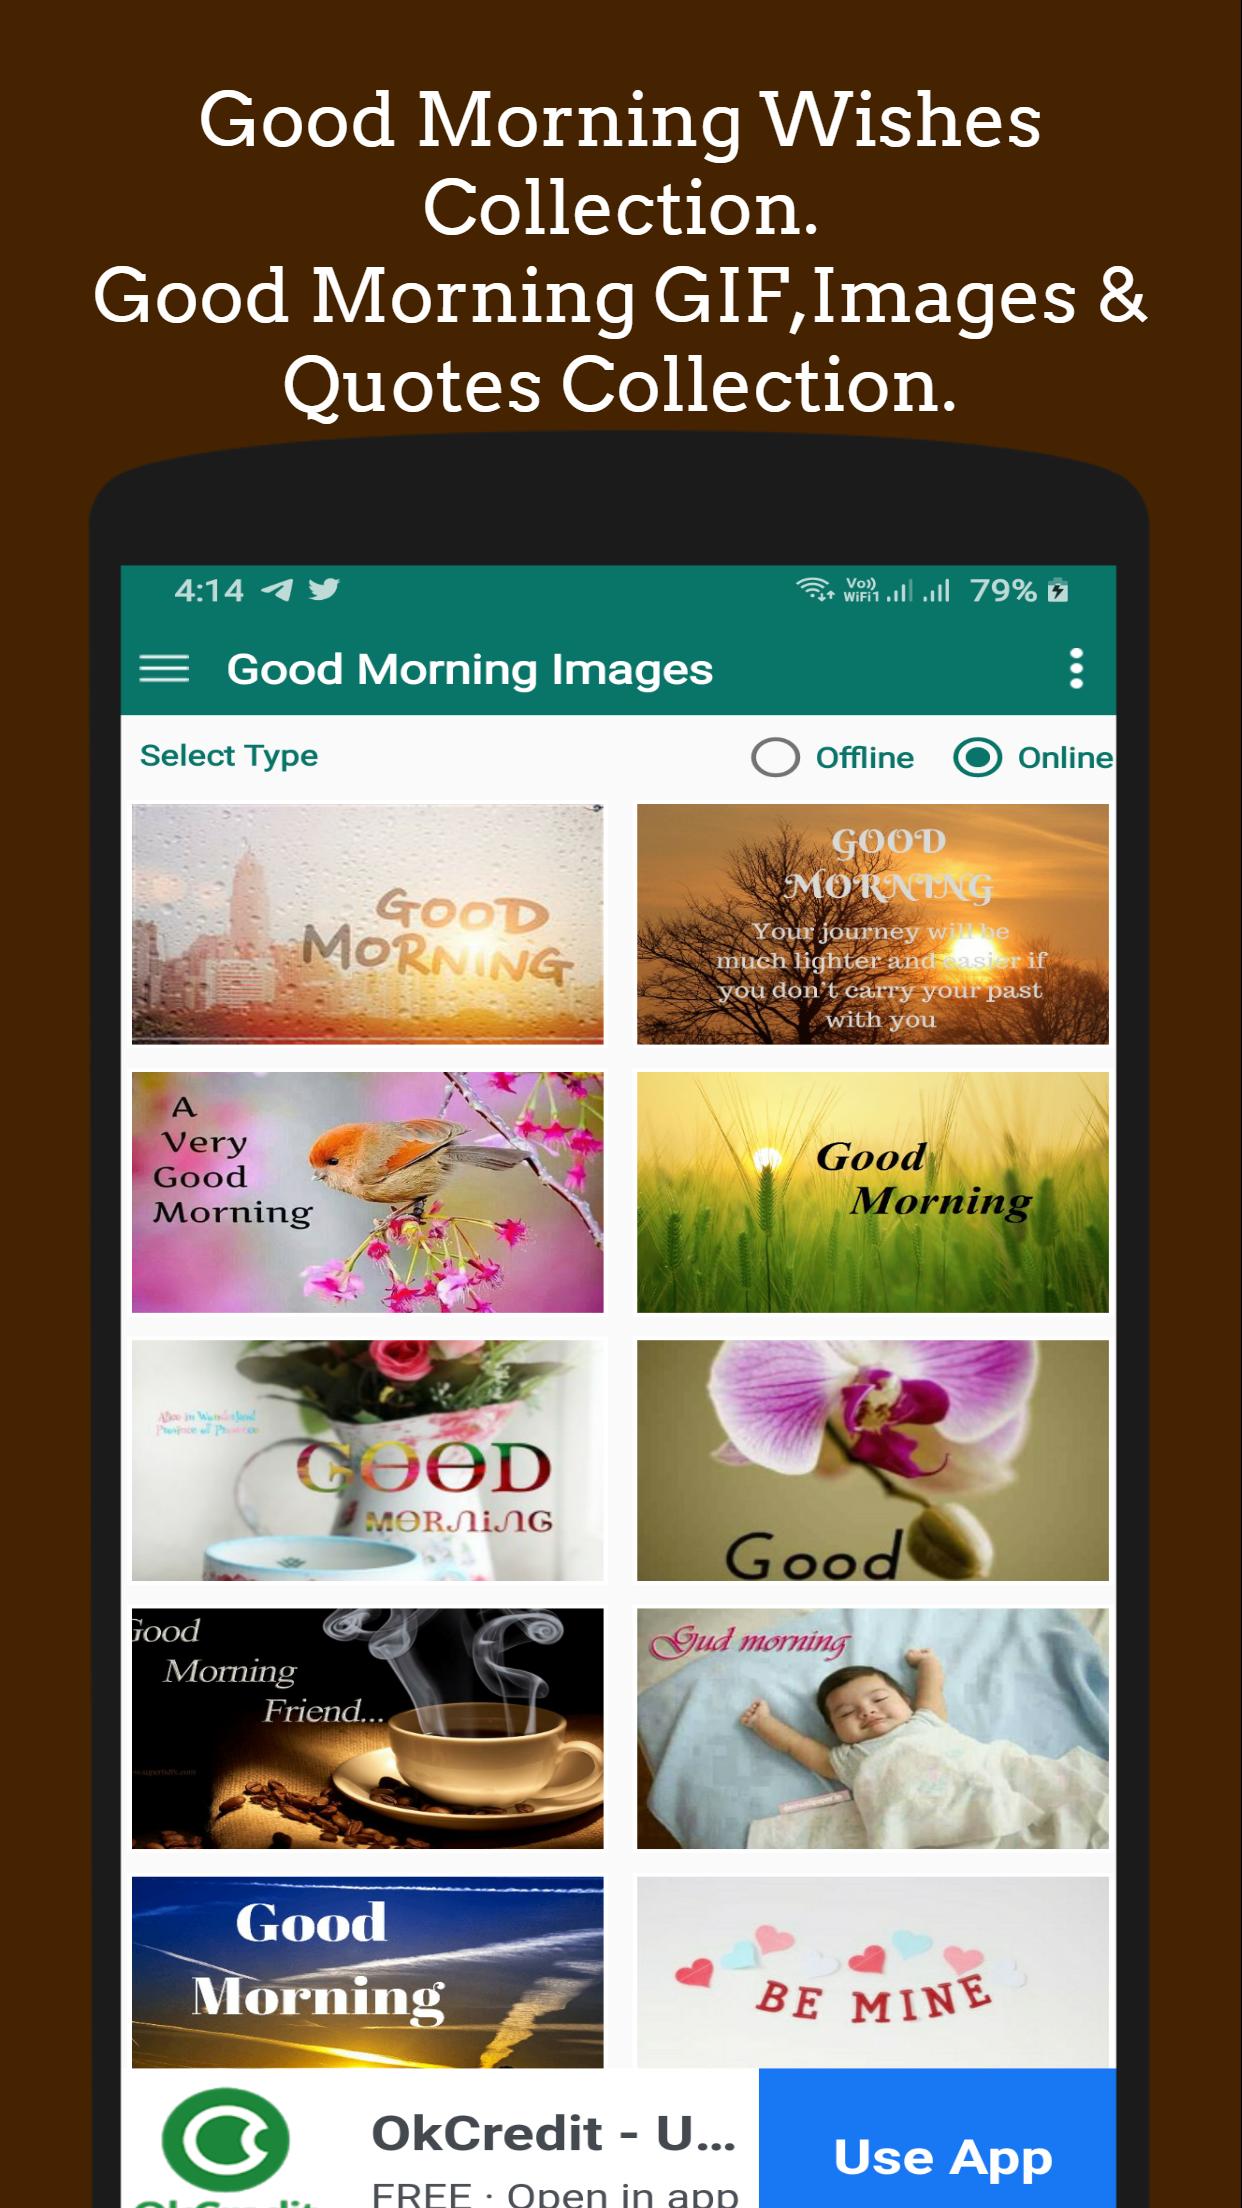 Good Morning Wishes GIF & Images. for Android - APK Download